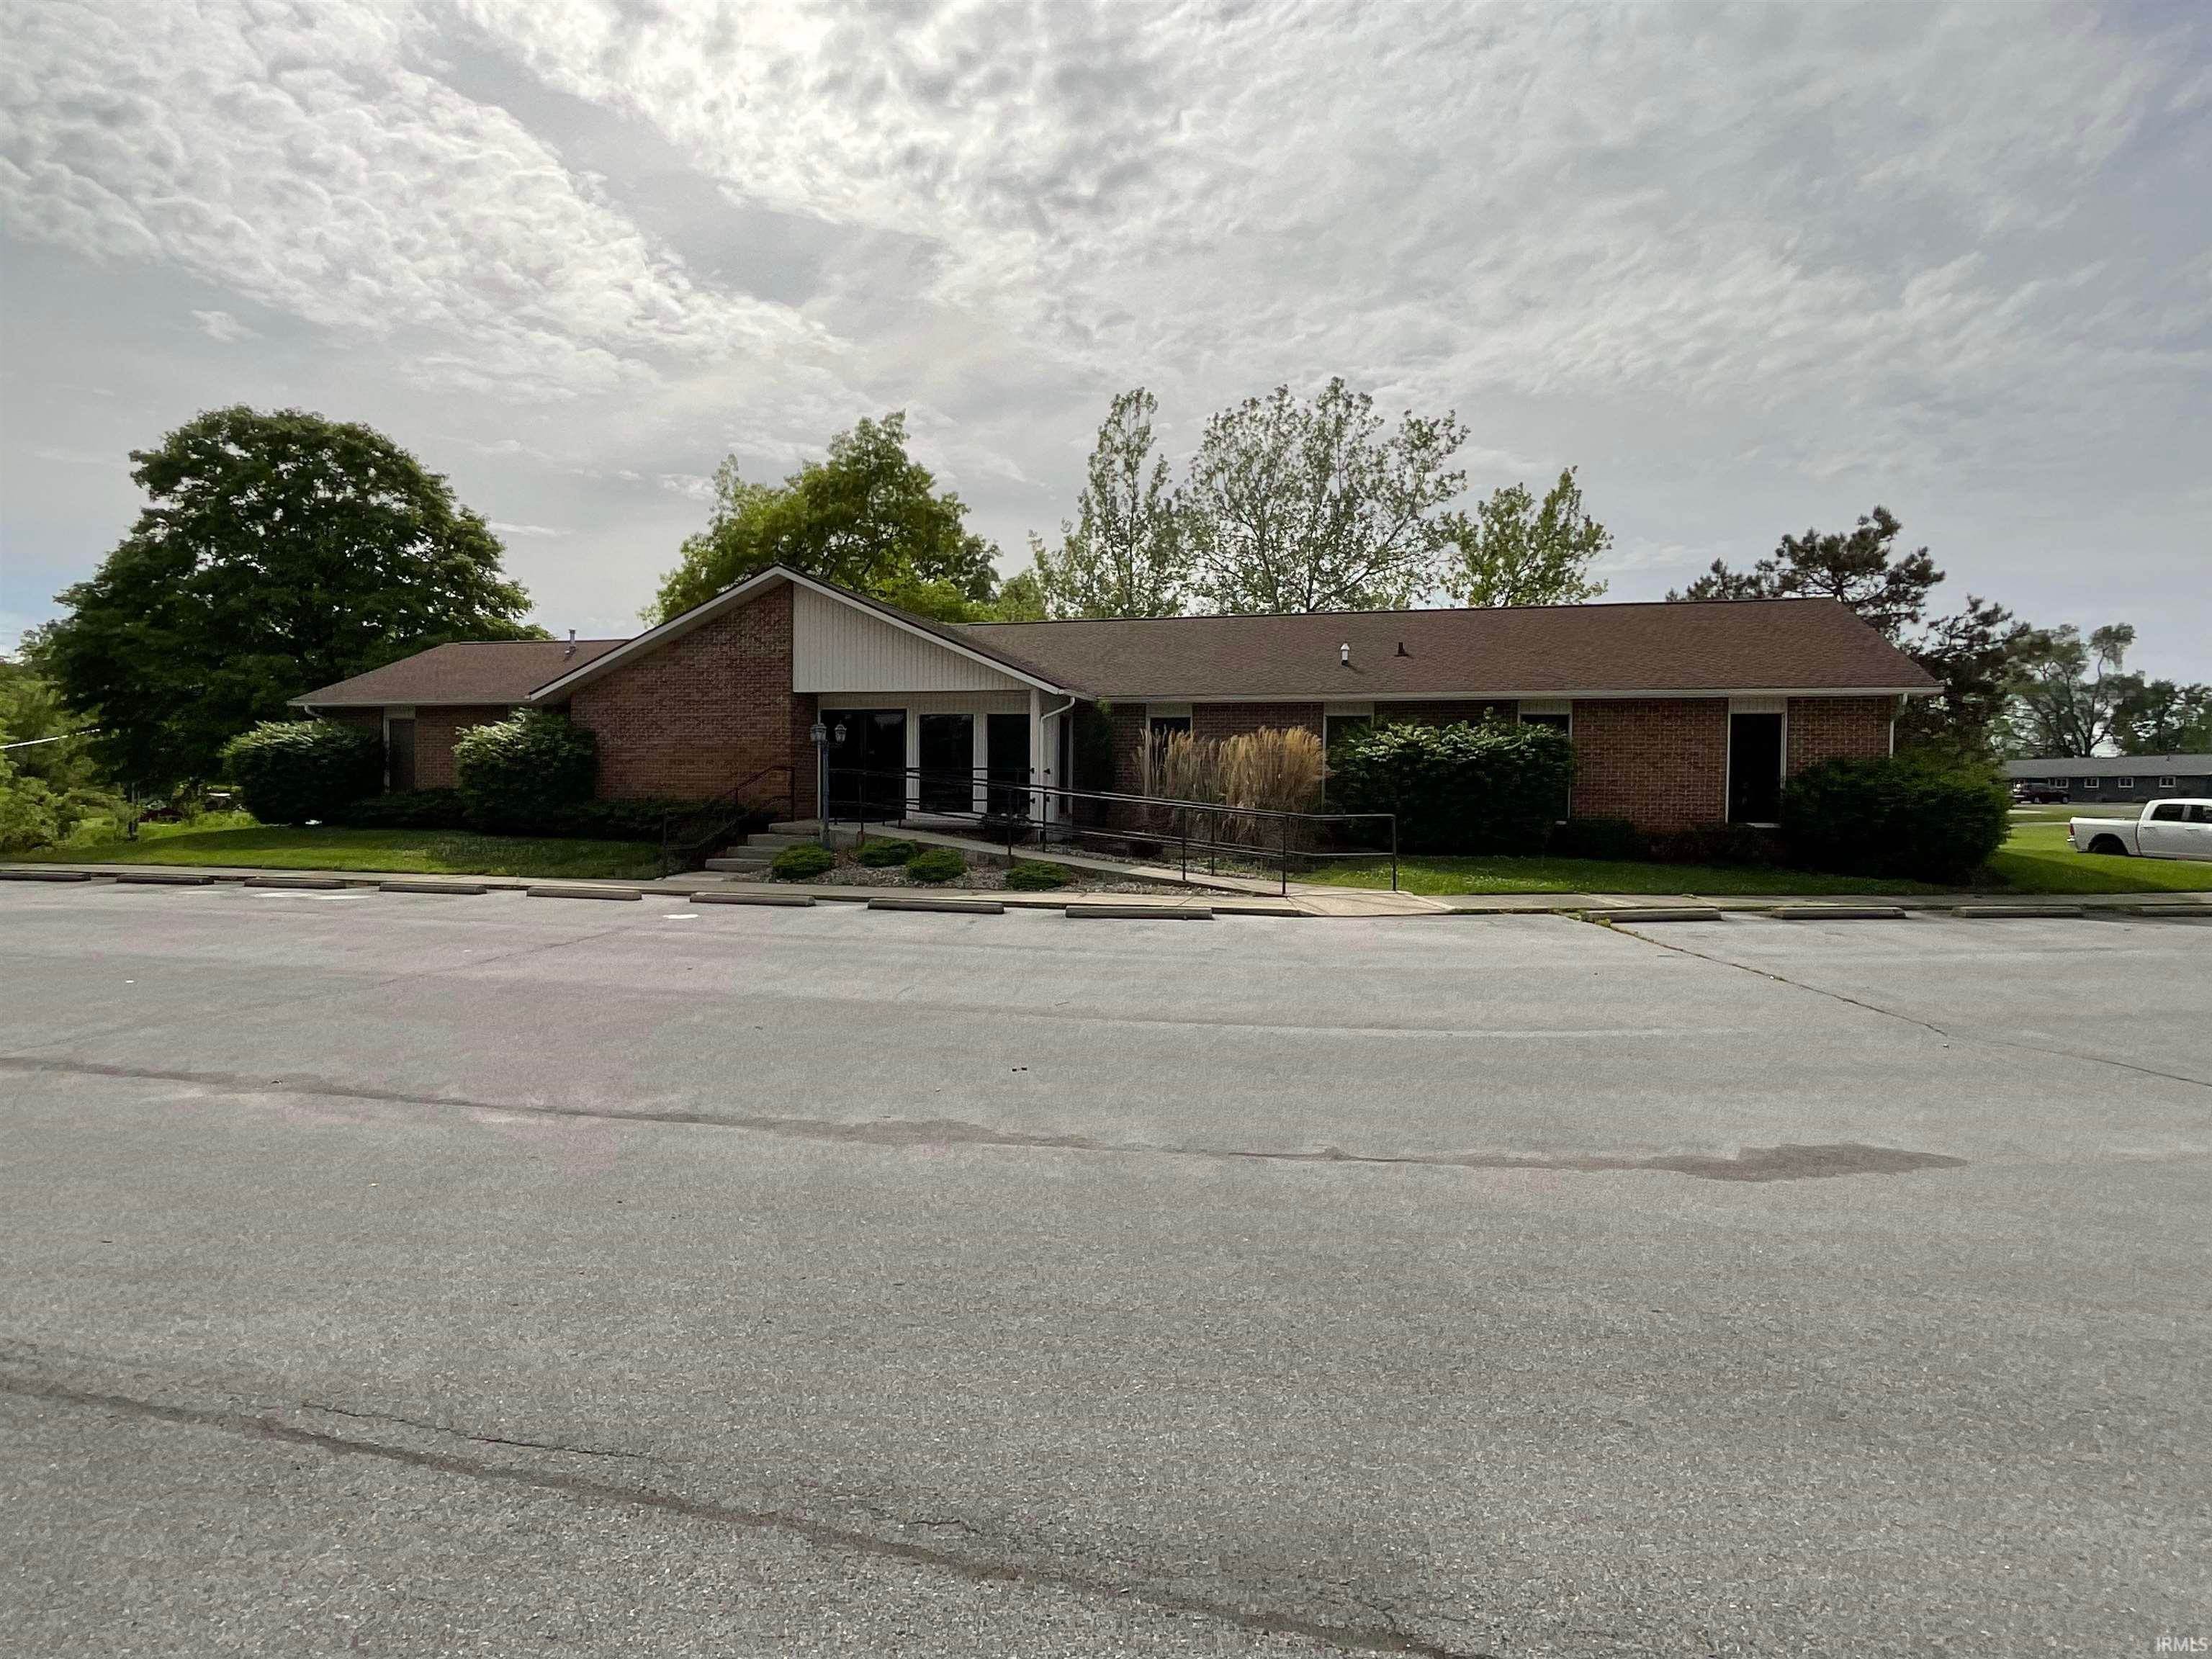 Comm / Ind Lease at 618 Professional Park Drive New Haven, Indiana 46774 United States